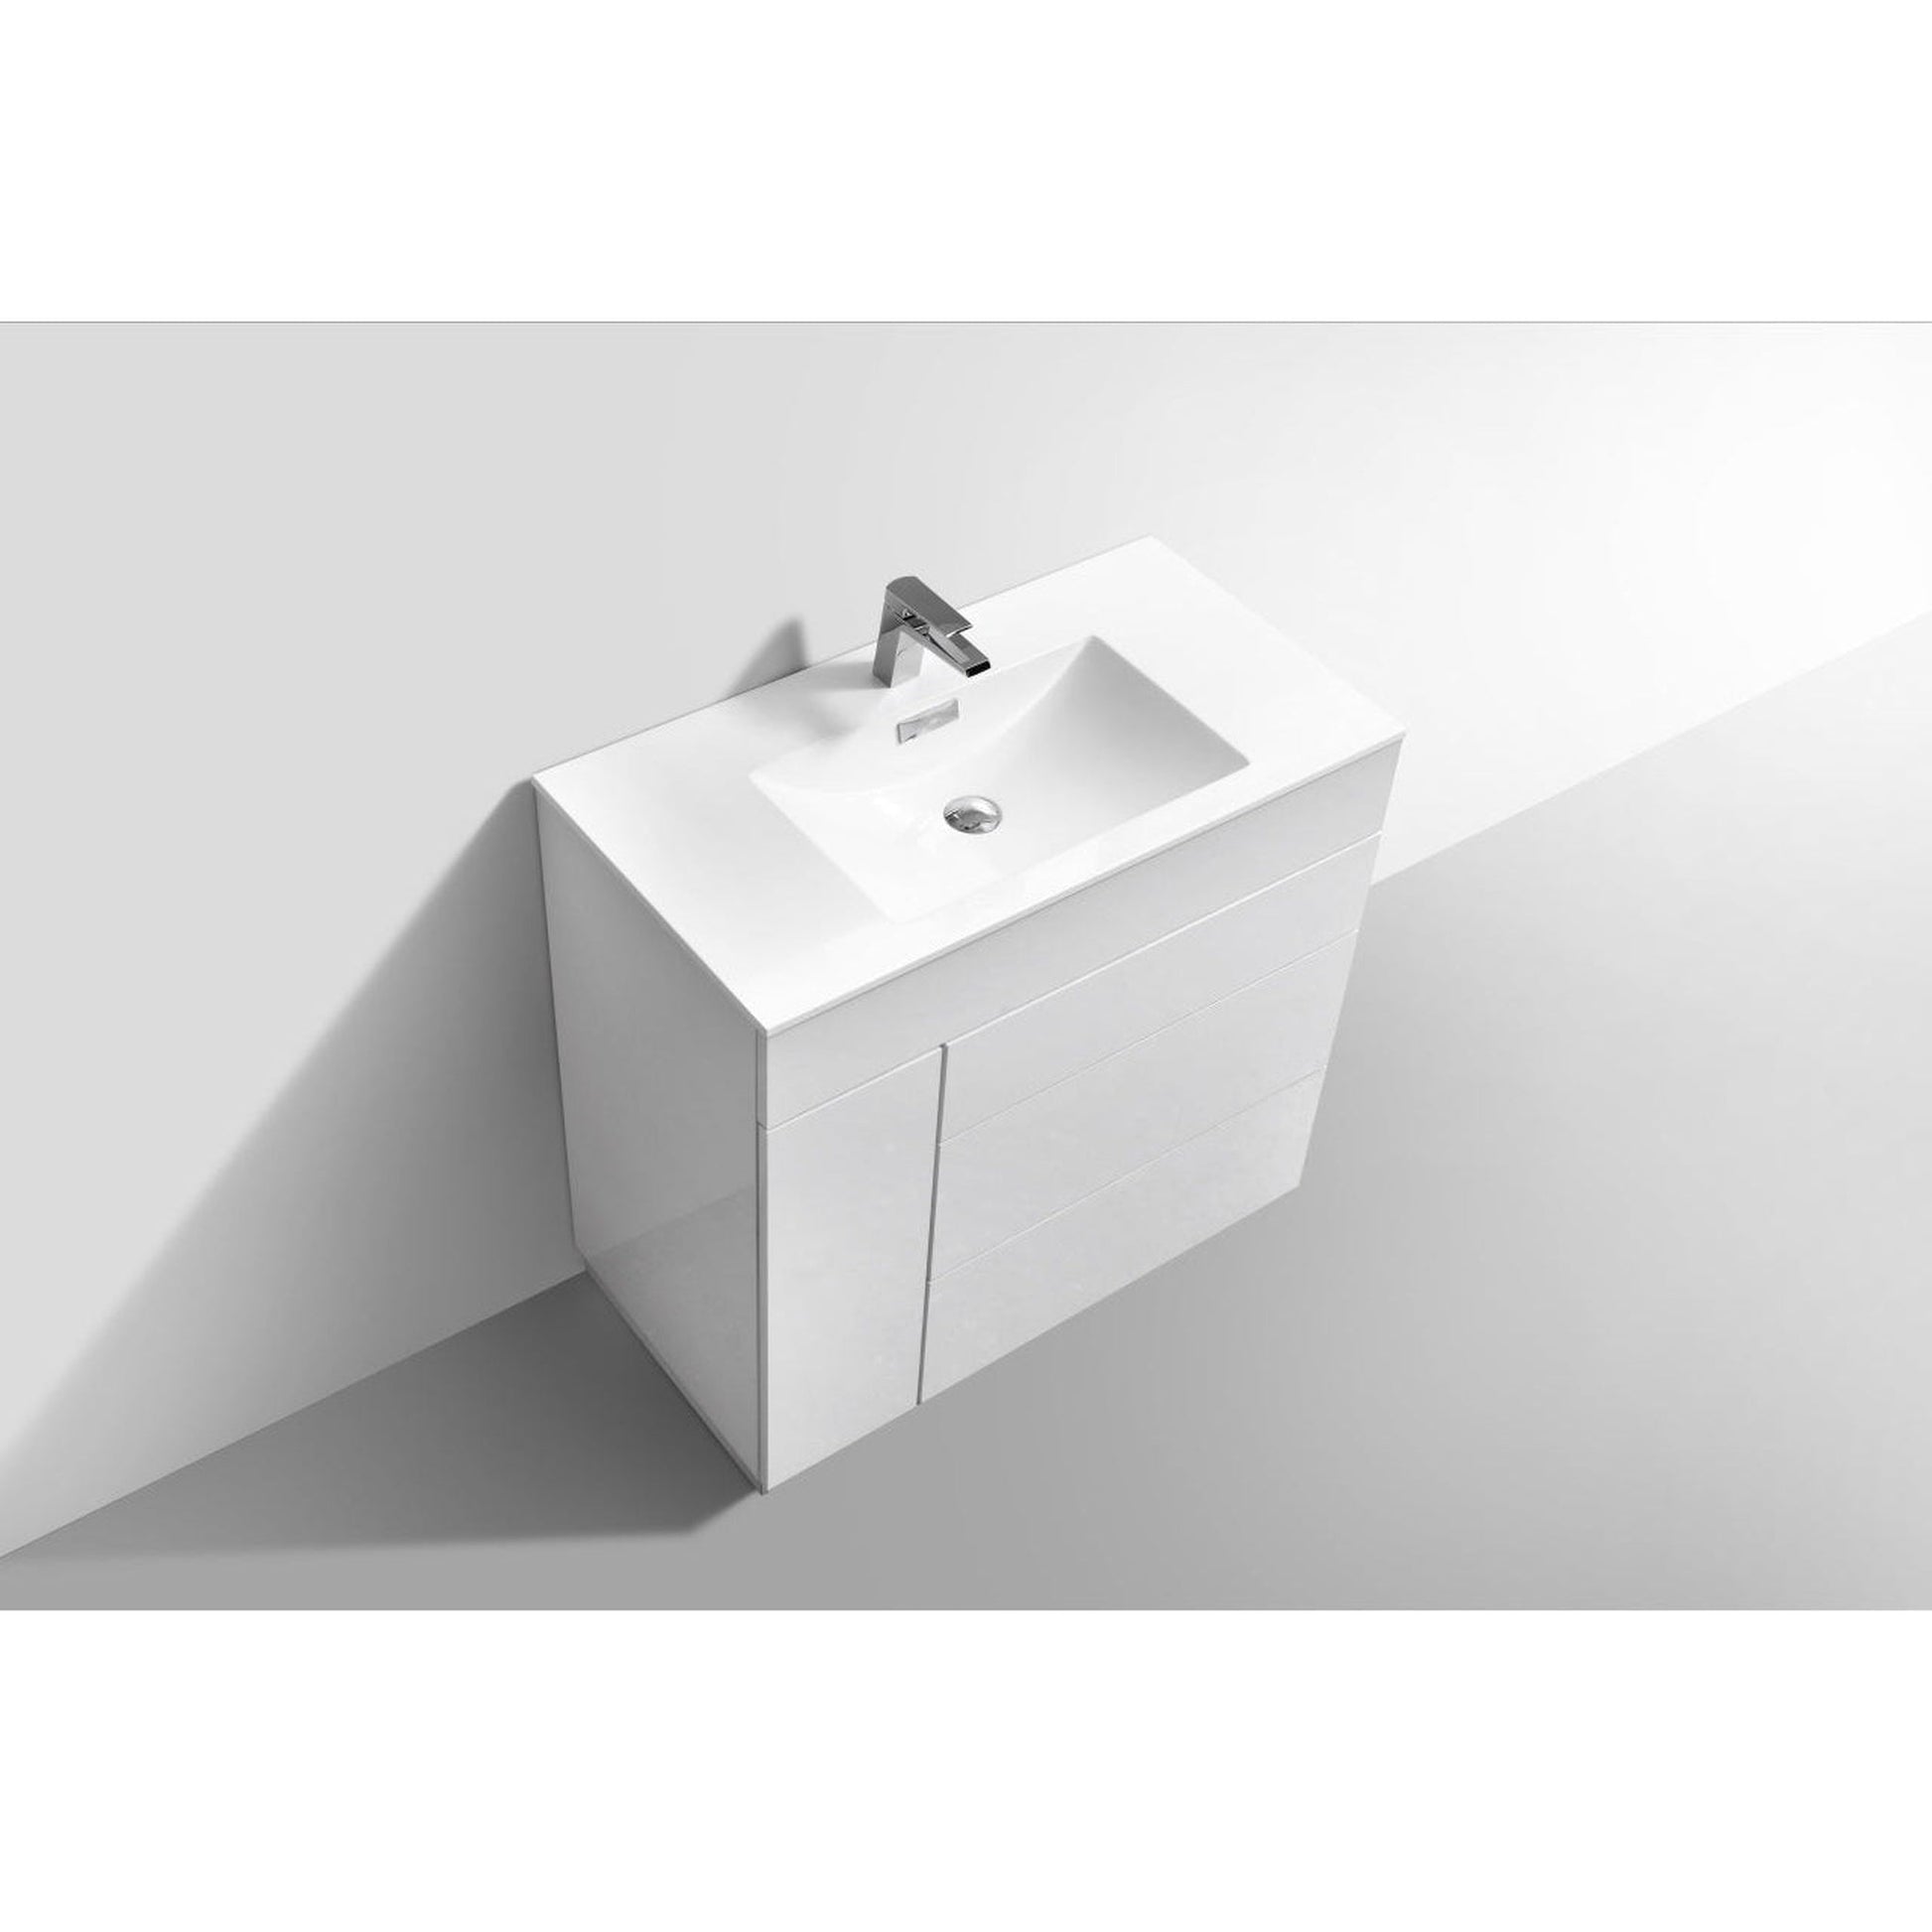 KubeBath Milano 36" High Gloss White Freestanding Modern Bathroom Vanity With Aluminum Kick Plate & Acrylic Composite Integrated Sink With Overflow and 36" White Framed Mirror With Shelf